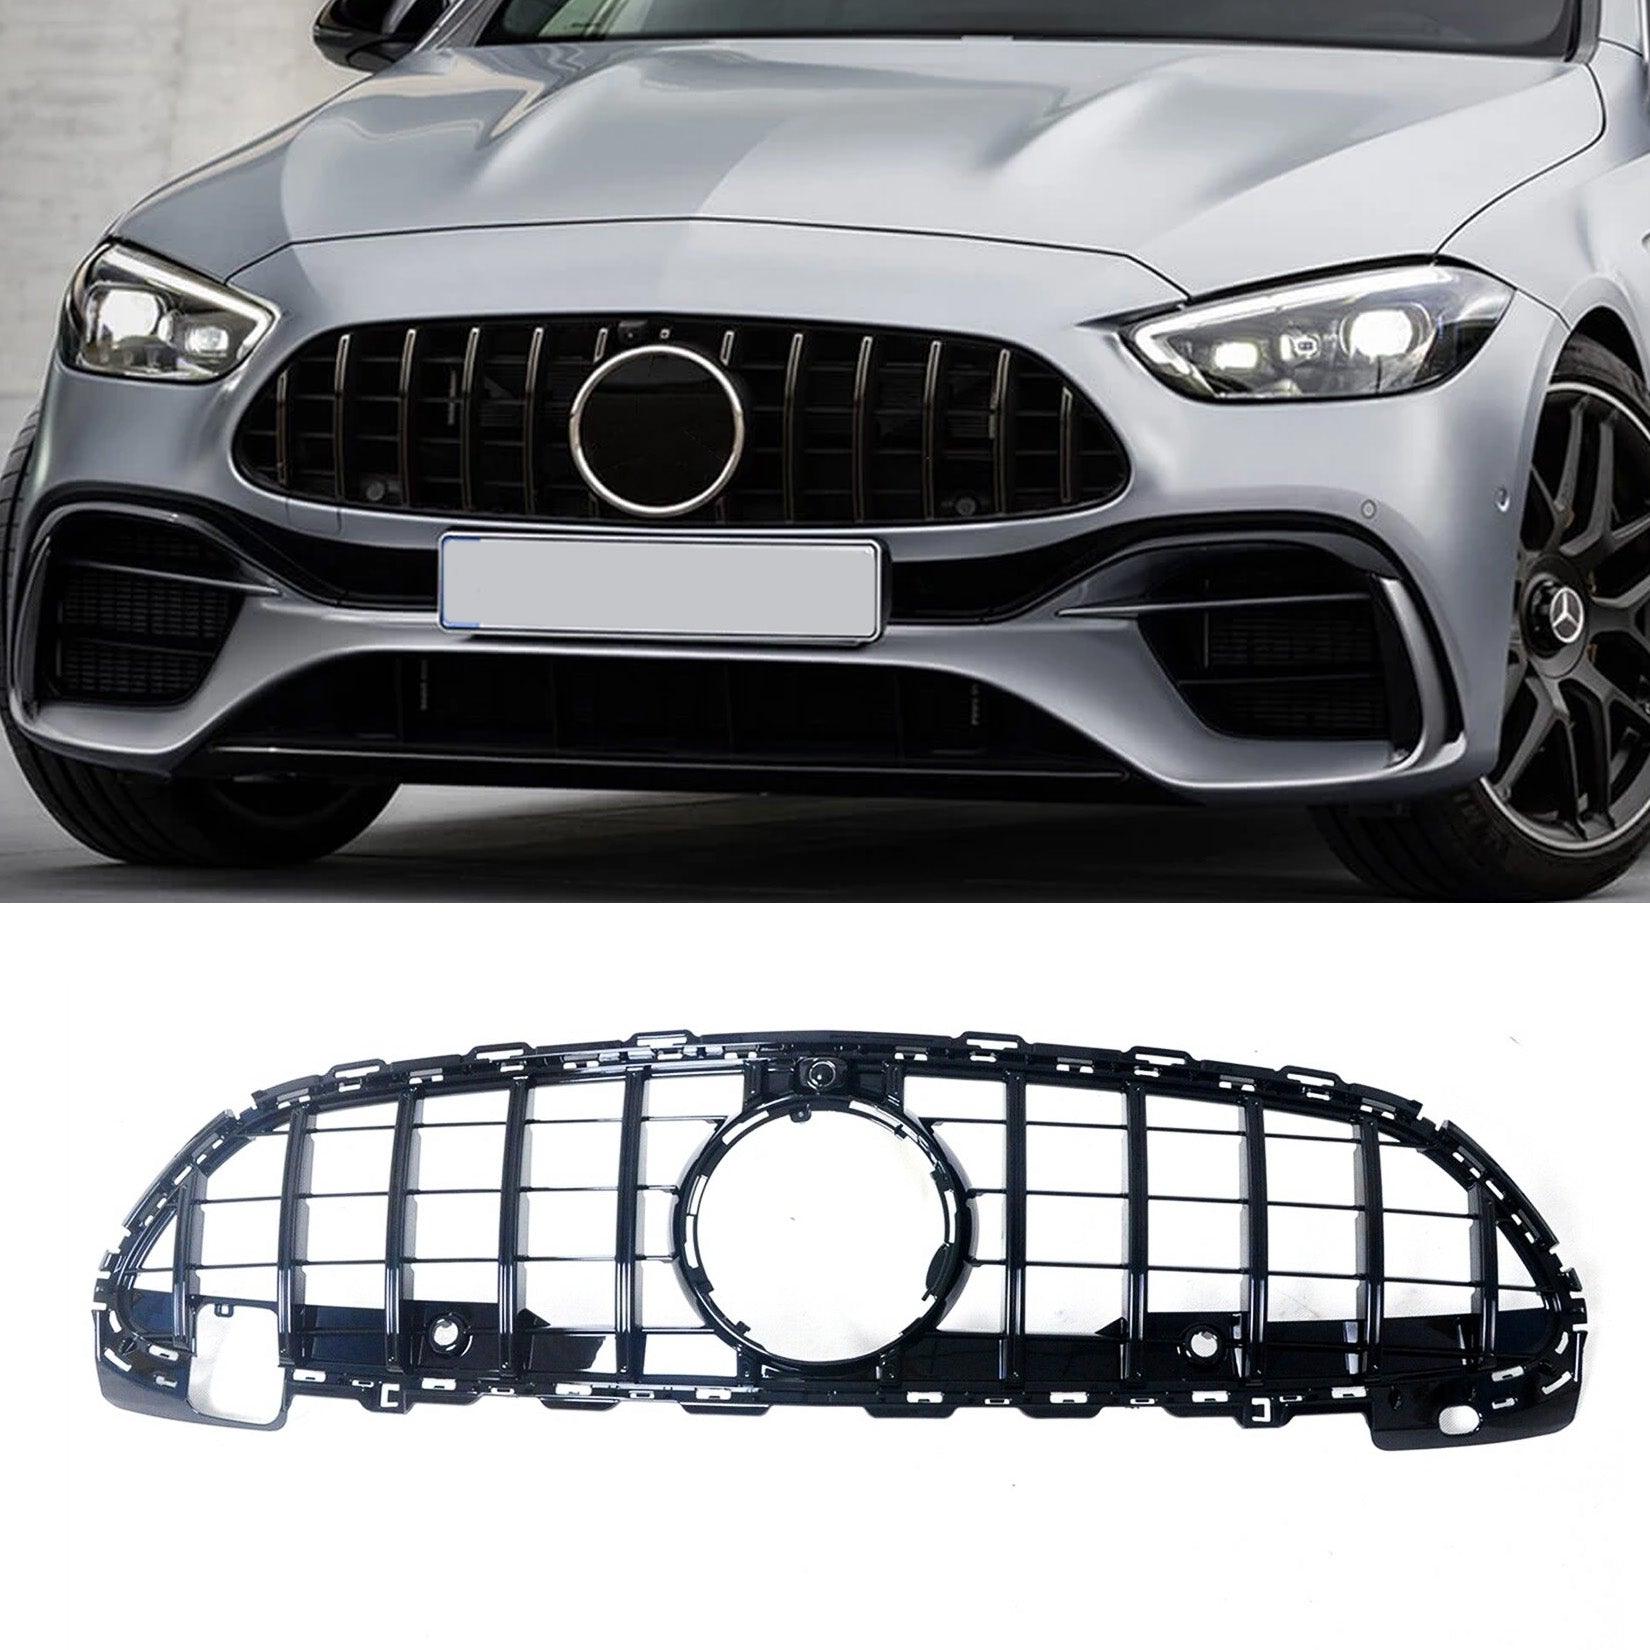 MERCEDES C-CLASS W206 2021+ - FRONT GRILL - PANAMERICANA GT-R STYLE - ALL BLACK - RisperStyling